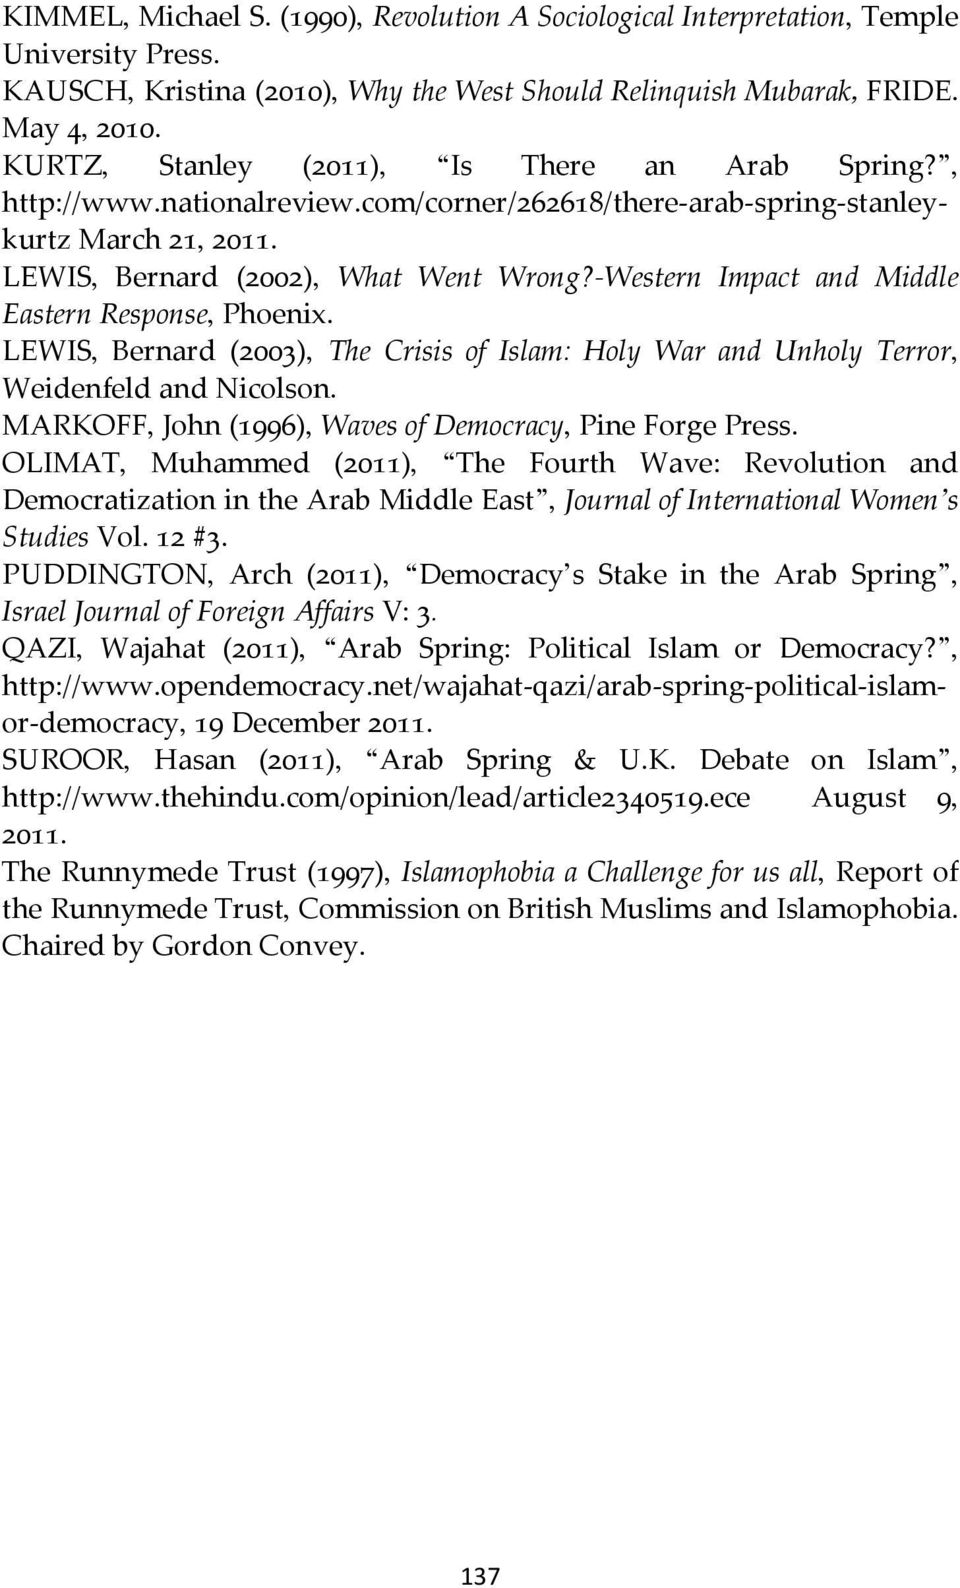 -Western Impact and Middle Eastern Response, Phoenix. LEWIS, Bernard (2003), The Crisis of Islam: Holy War and Unholy Terror, Weidenfeld and Nicolson.